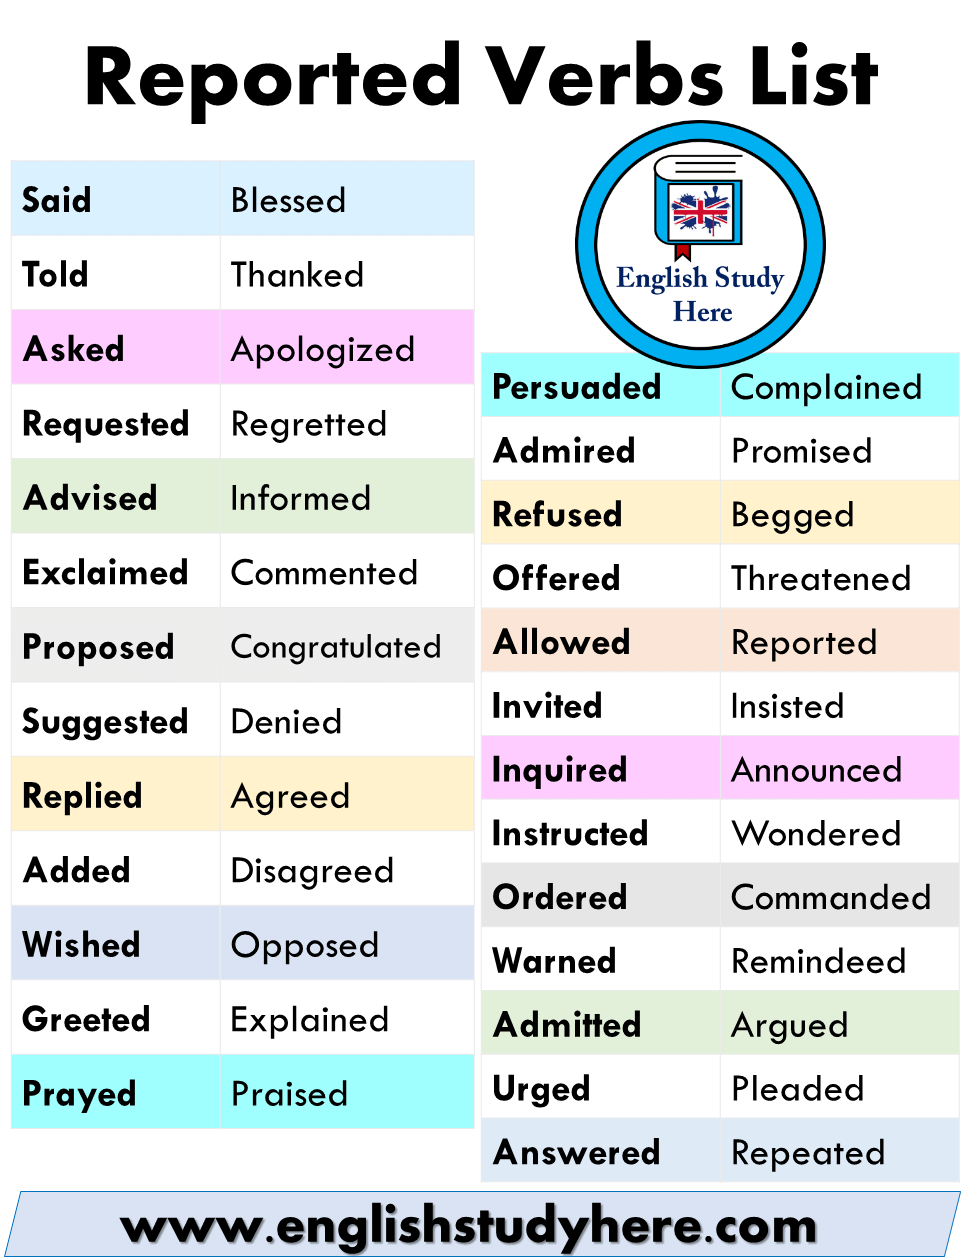 in reported speech the verb usually